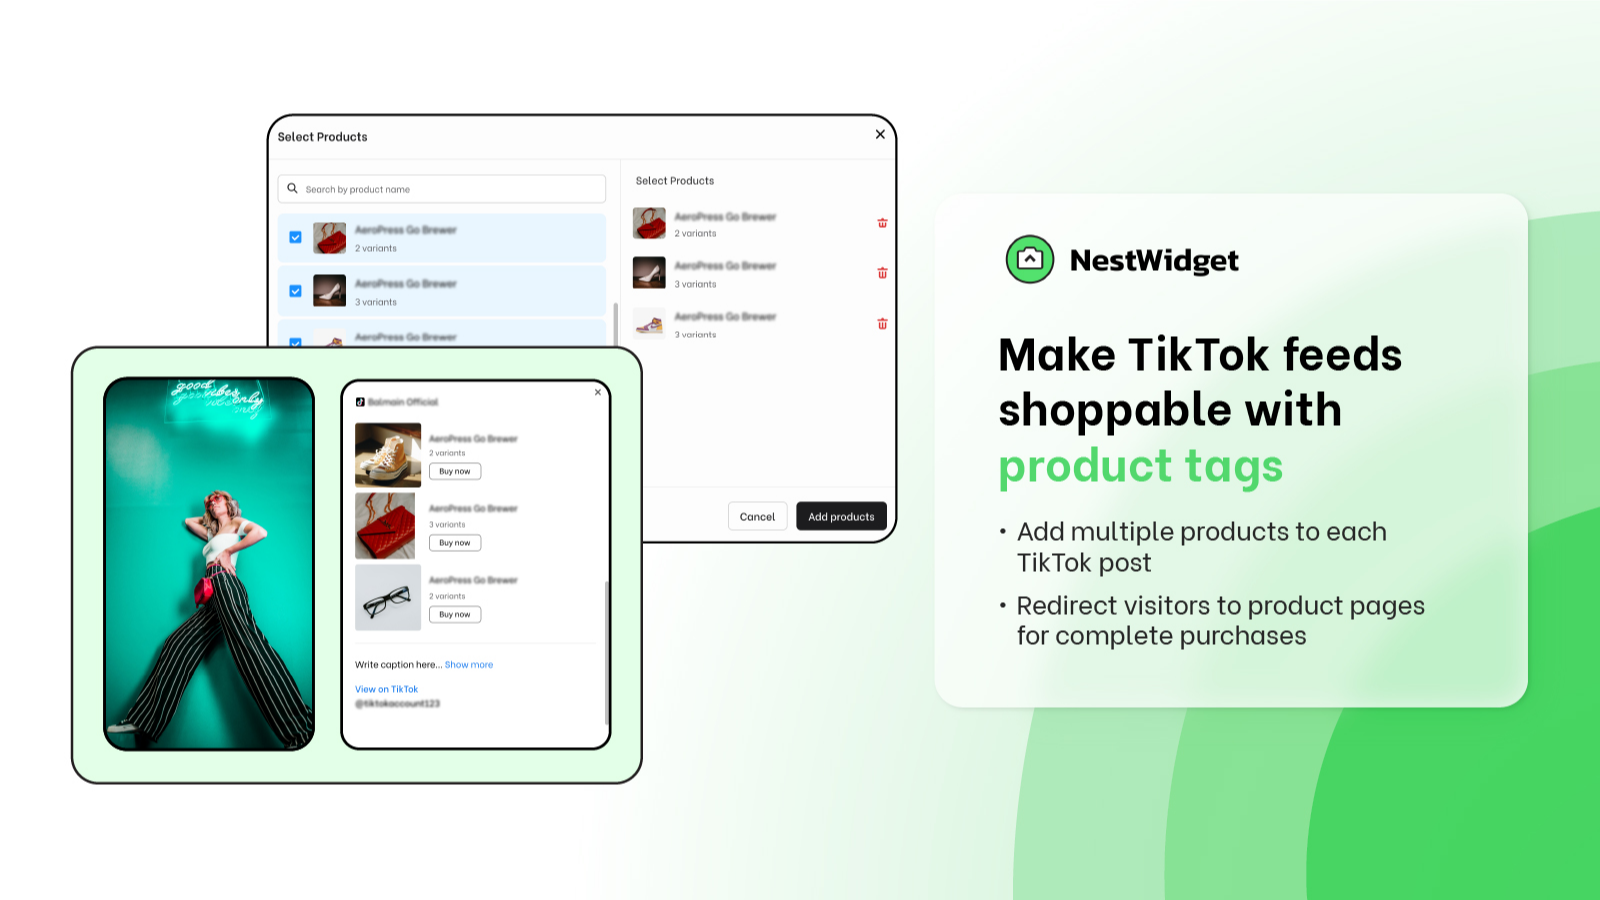 Make TikTok feeds shoppable with product tags